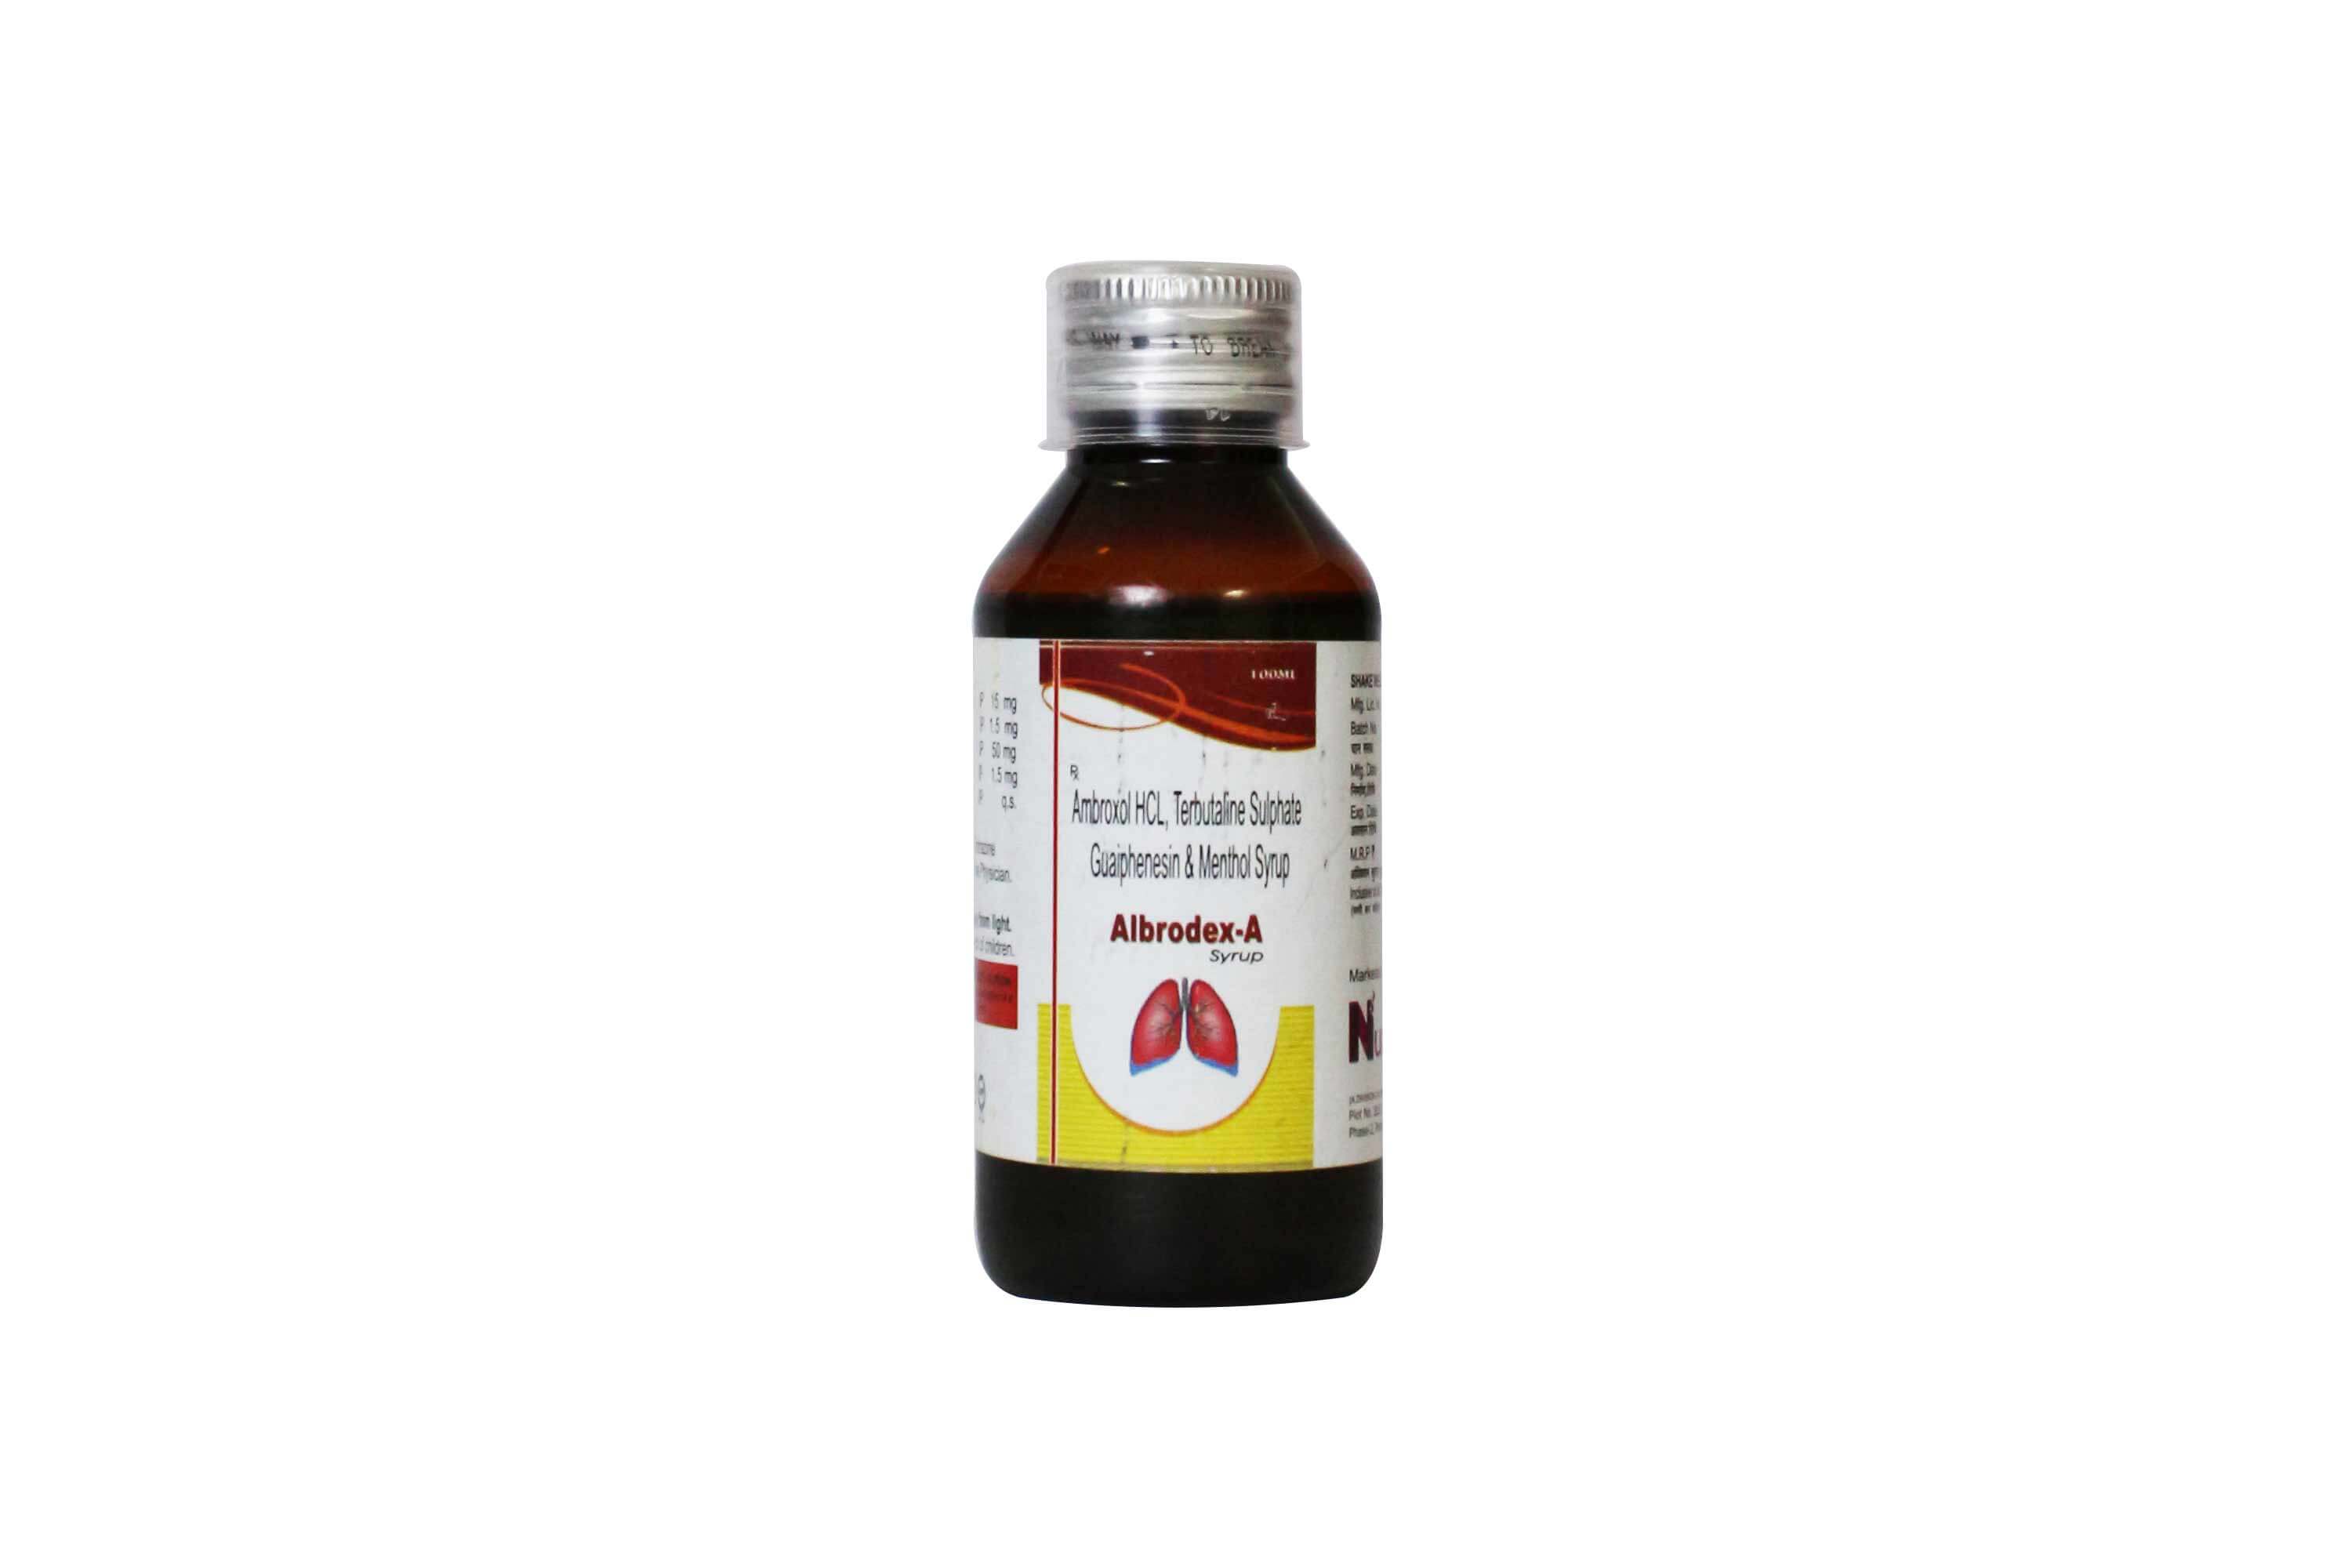 Product Name: Albrodex A, Compositions of Albrodex A are Ambroxol  HCL Terbutaline Sulphate Guaiphenesin & Menthol Syrup - Numantis Healthcare